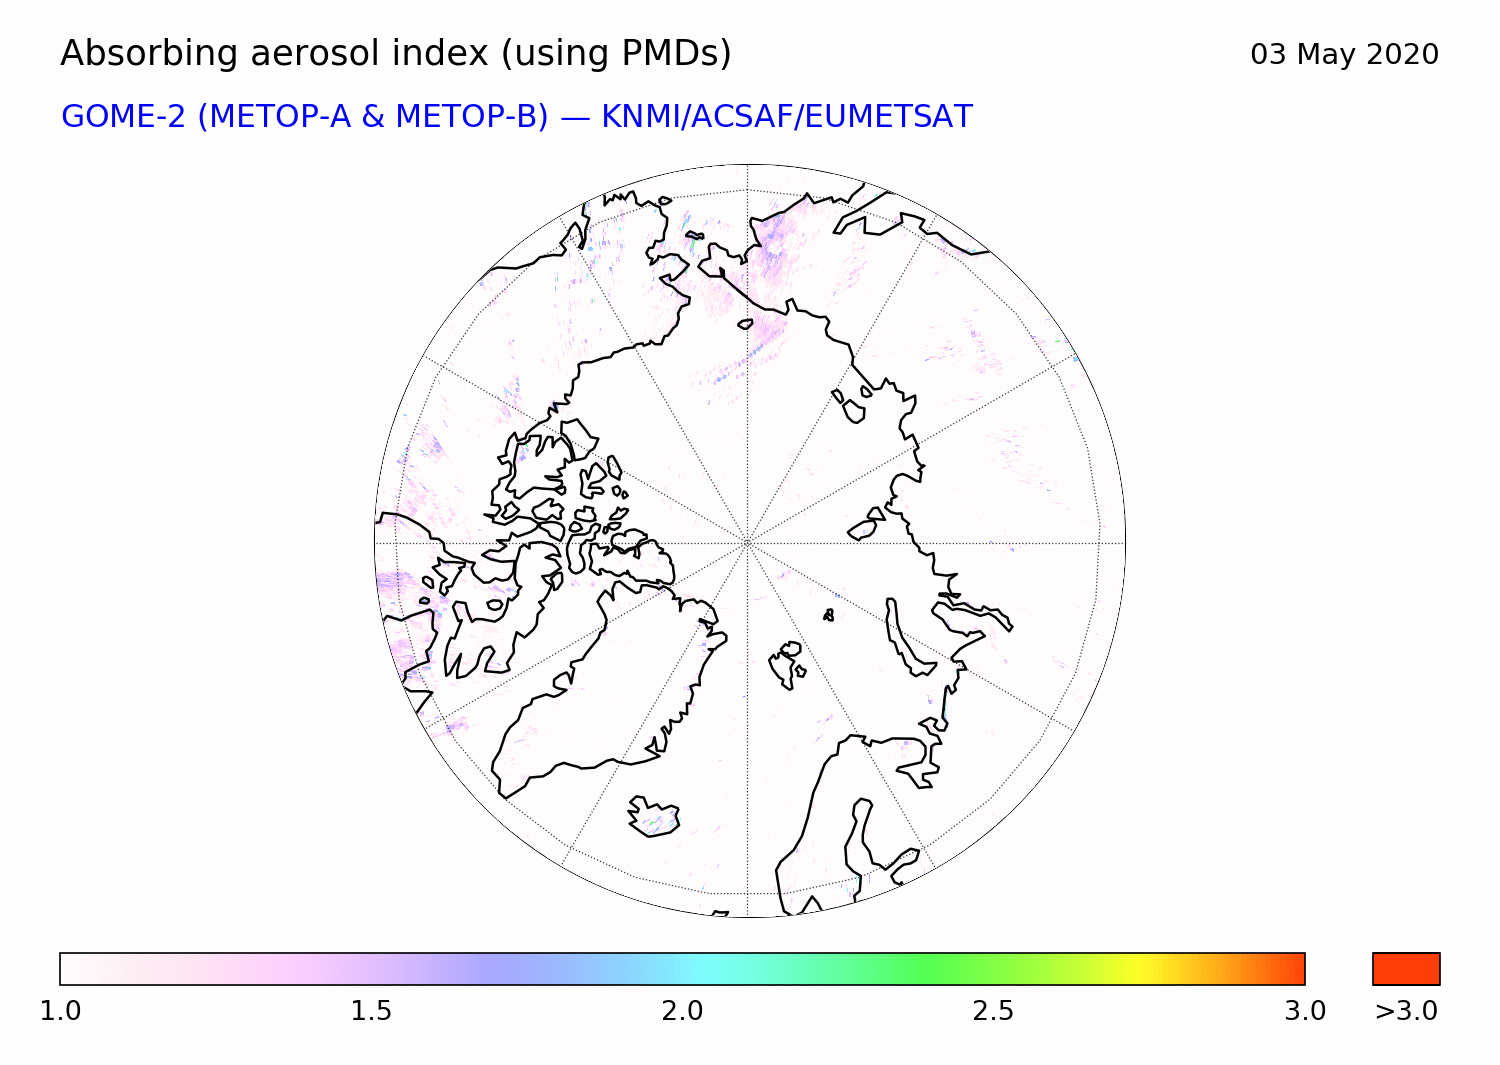 GOME-2 - Absorbing aerosol index of 03 May 2020